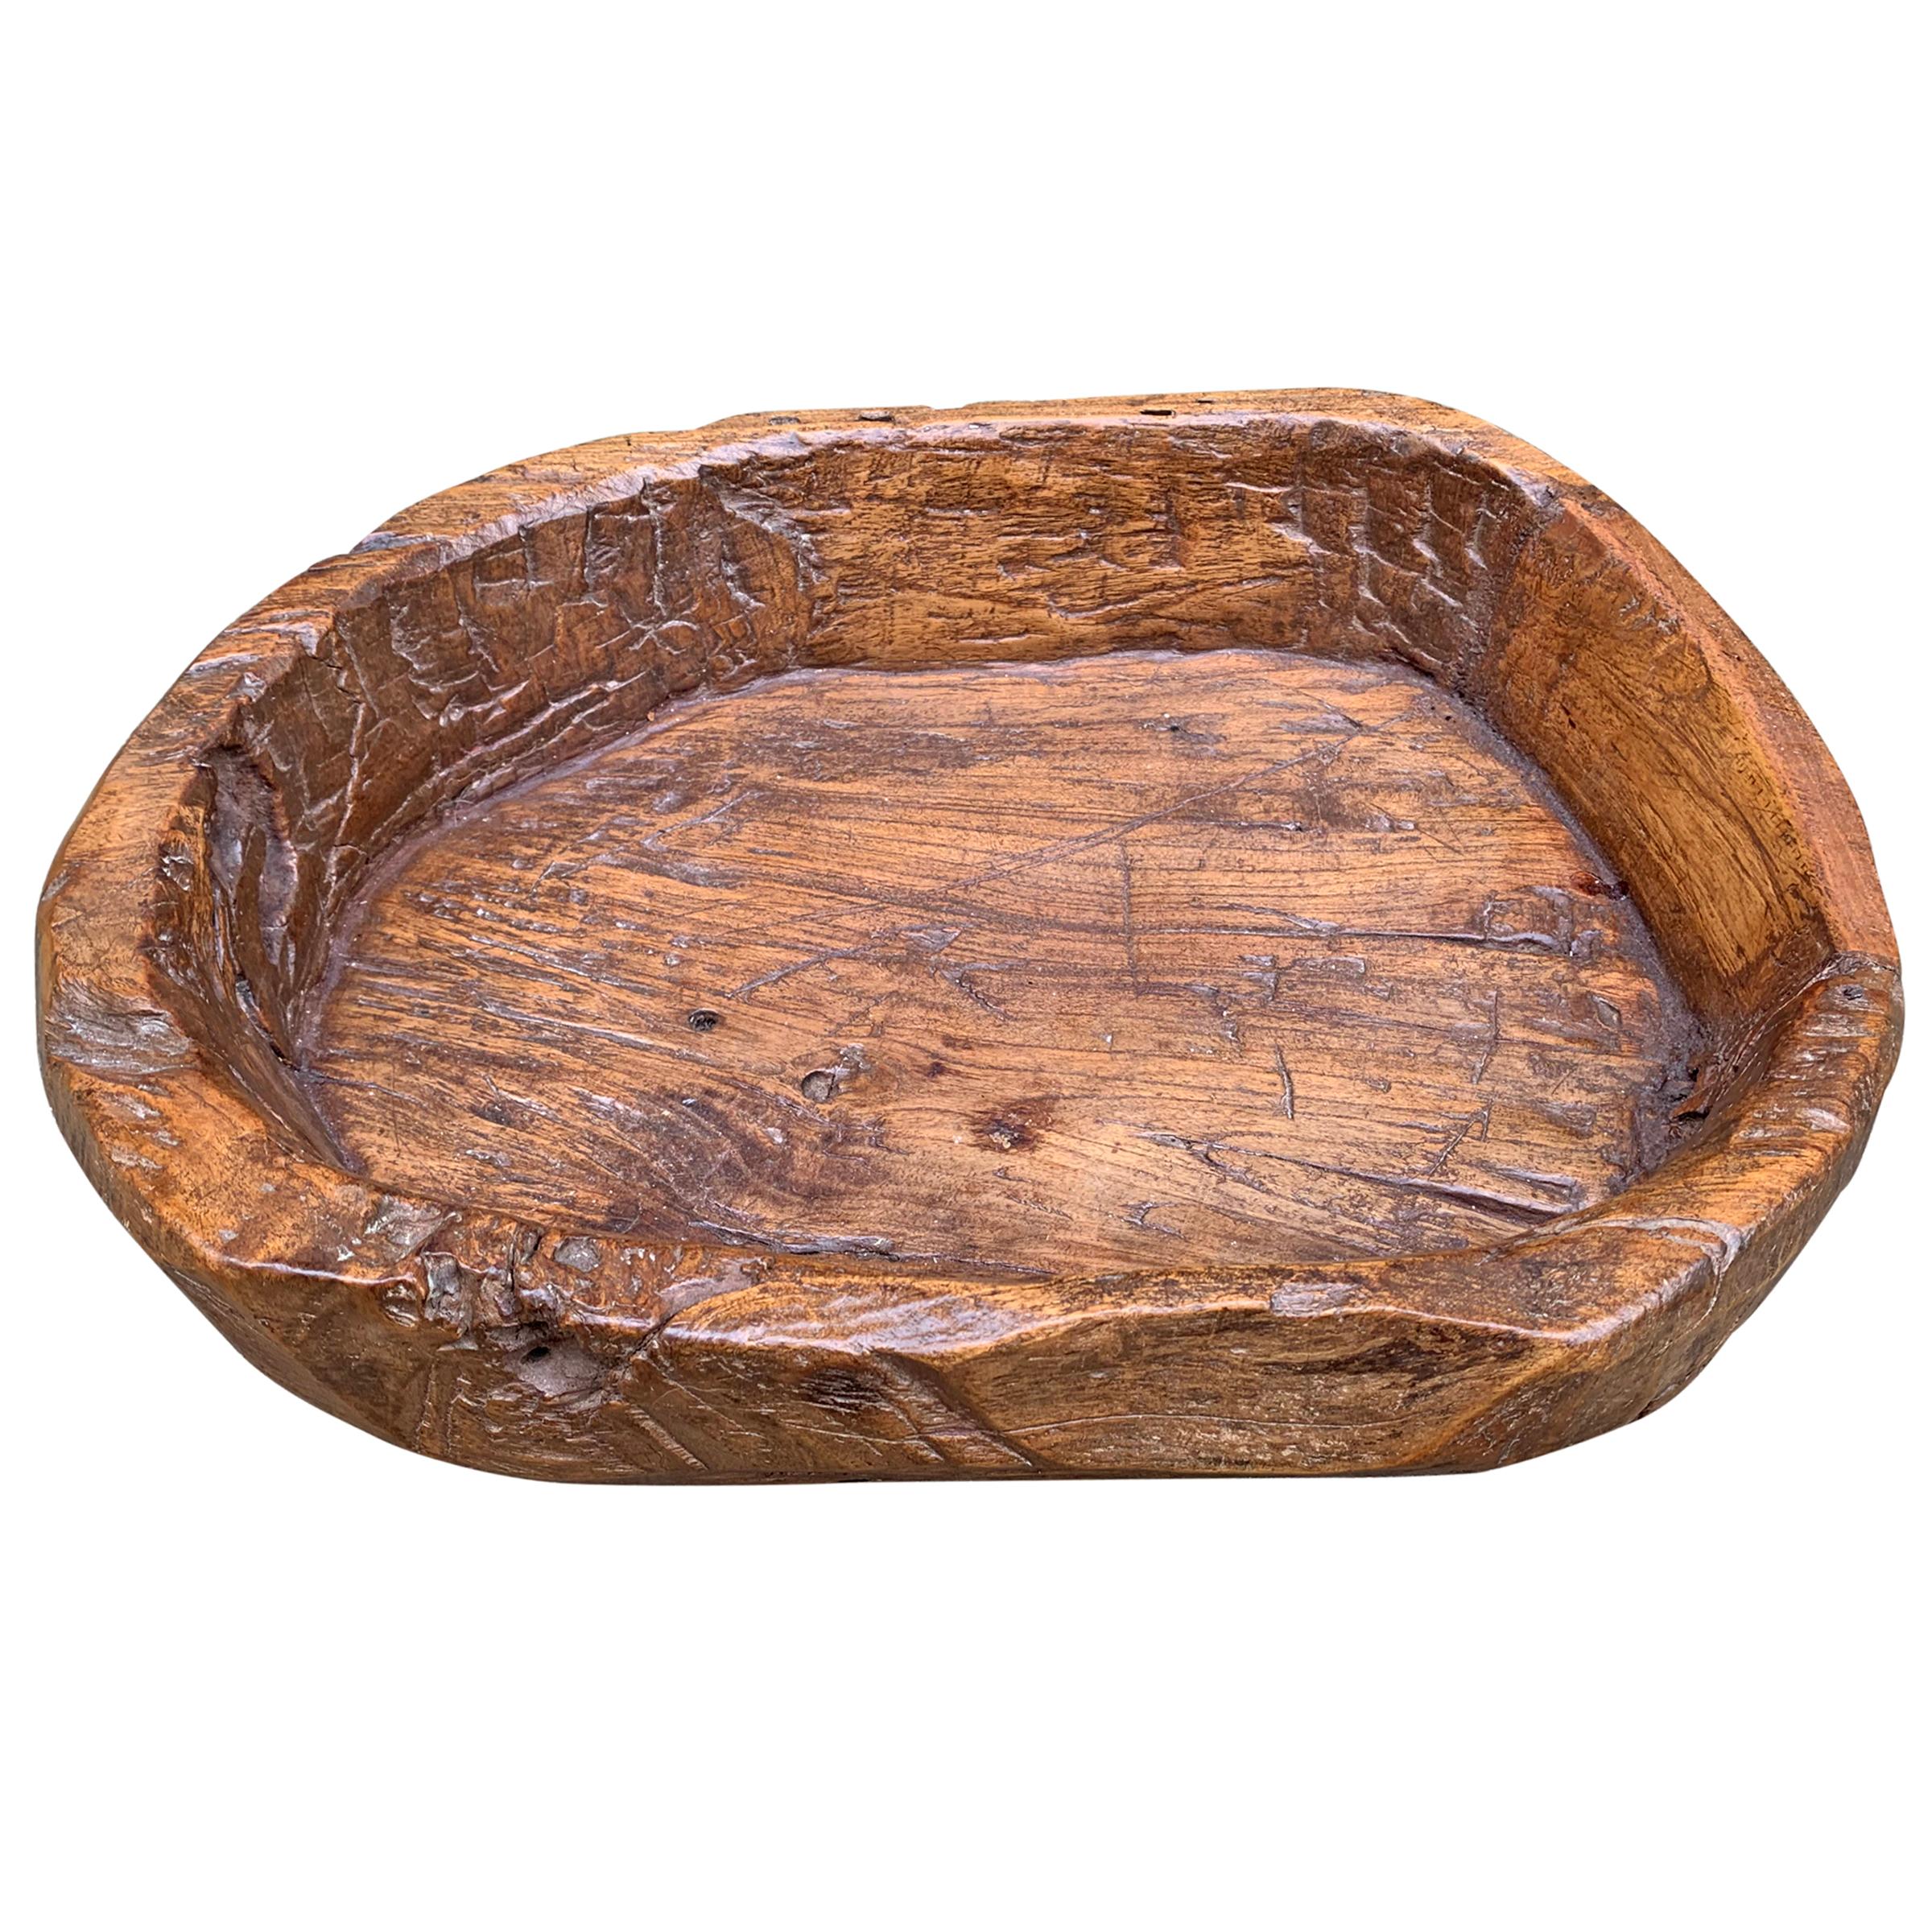 A fantastic 19th century primitive wood bowl with signs of hand carving, a wide flat bottom, and a fantastic patina. Would be perfect for catching the day’s mail, serving bread at your next dinner party, or filled with hand towels in your powder